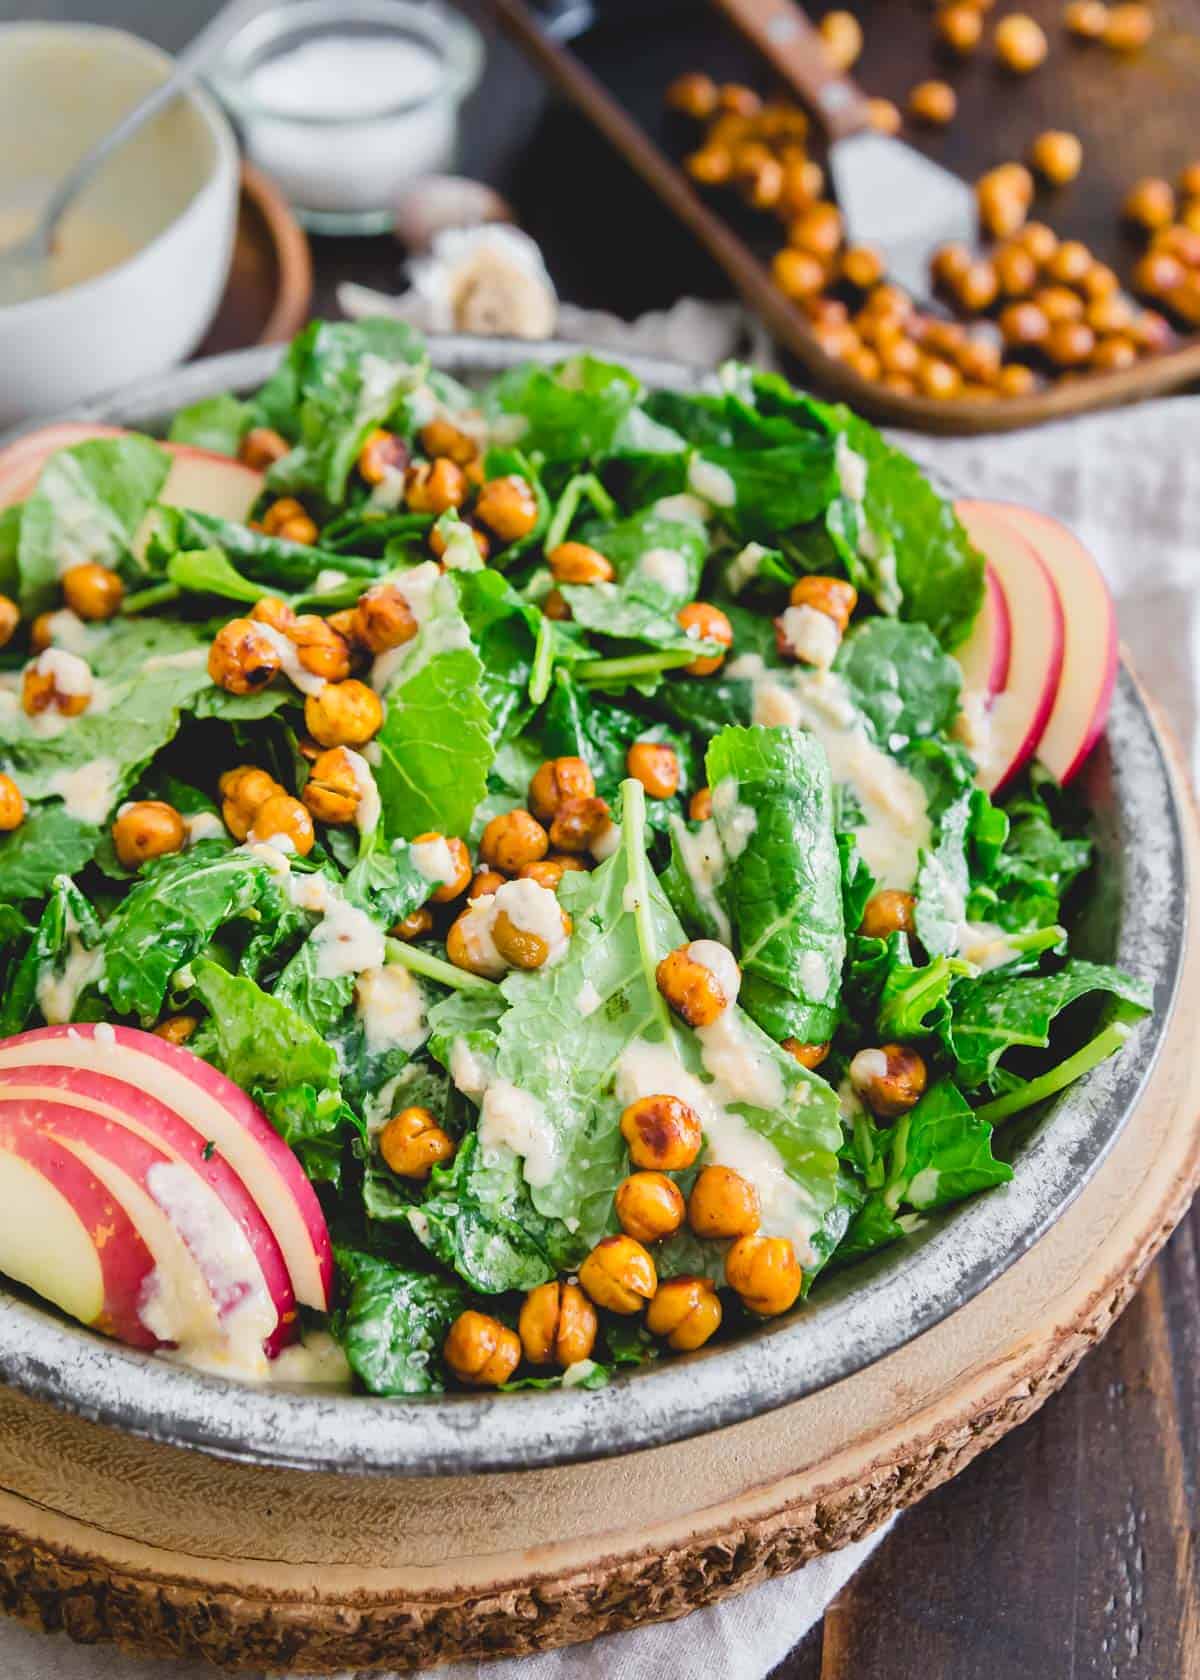 A close-up view of a bowl full of kale apple salad with BBQ chickpeas.